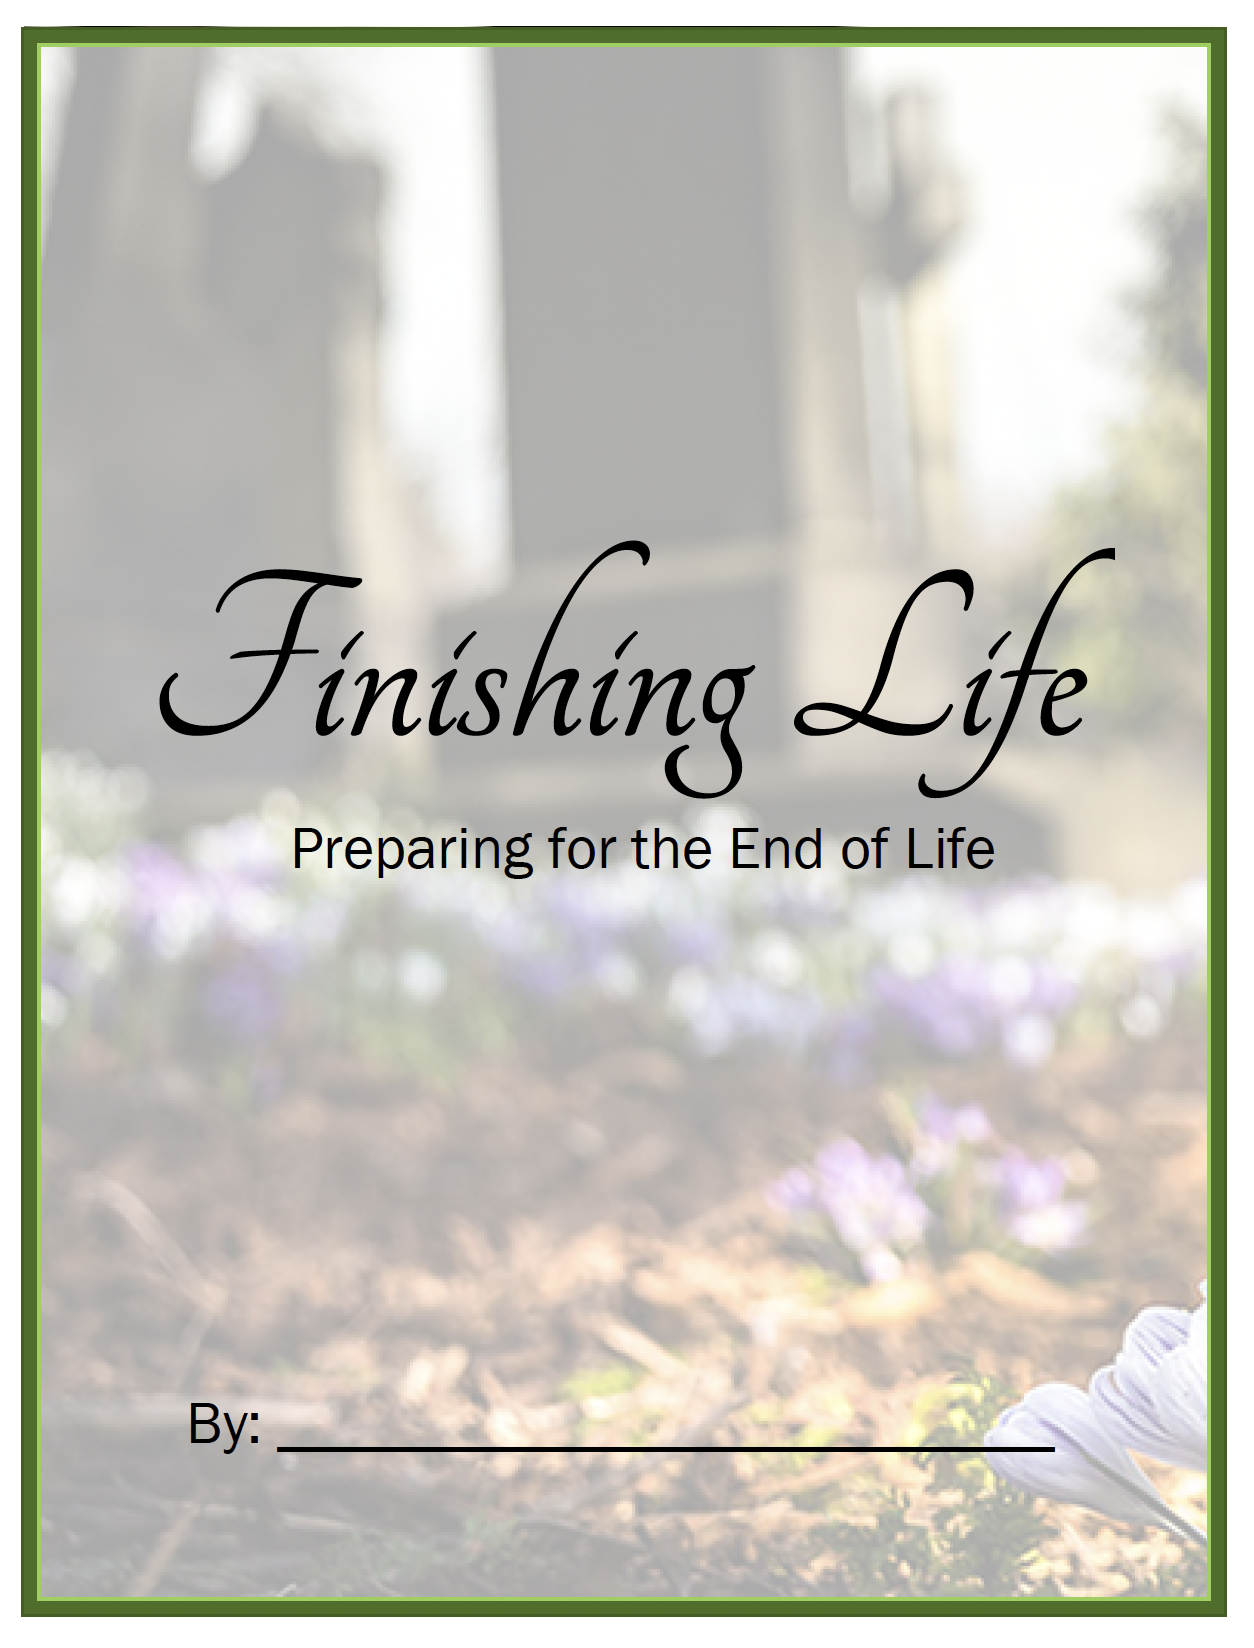 Finishing life booklet cover